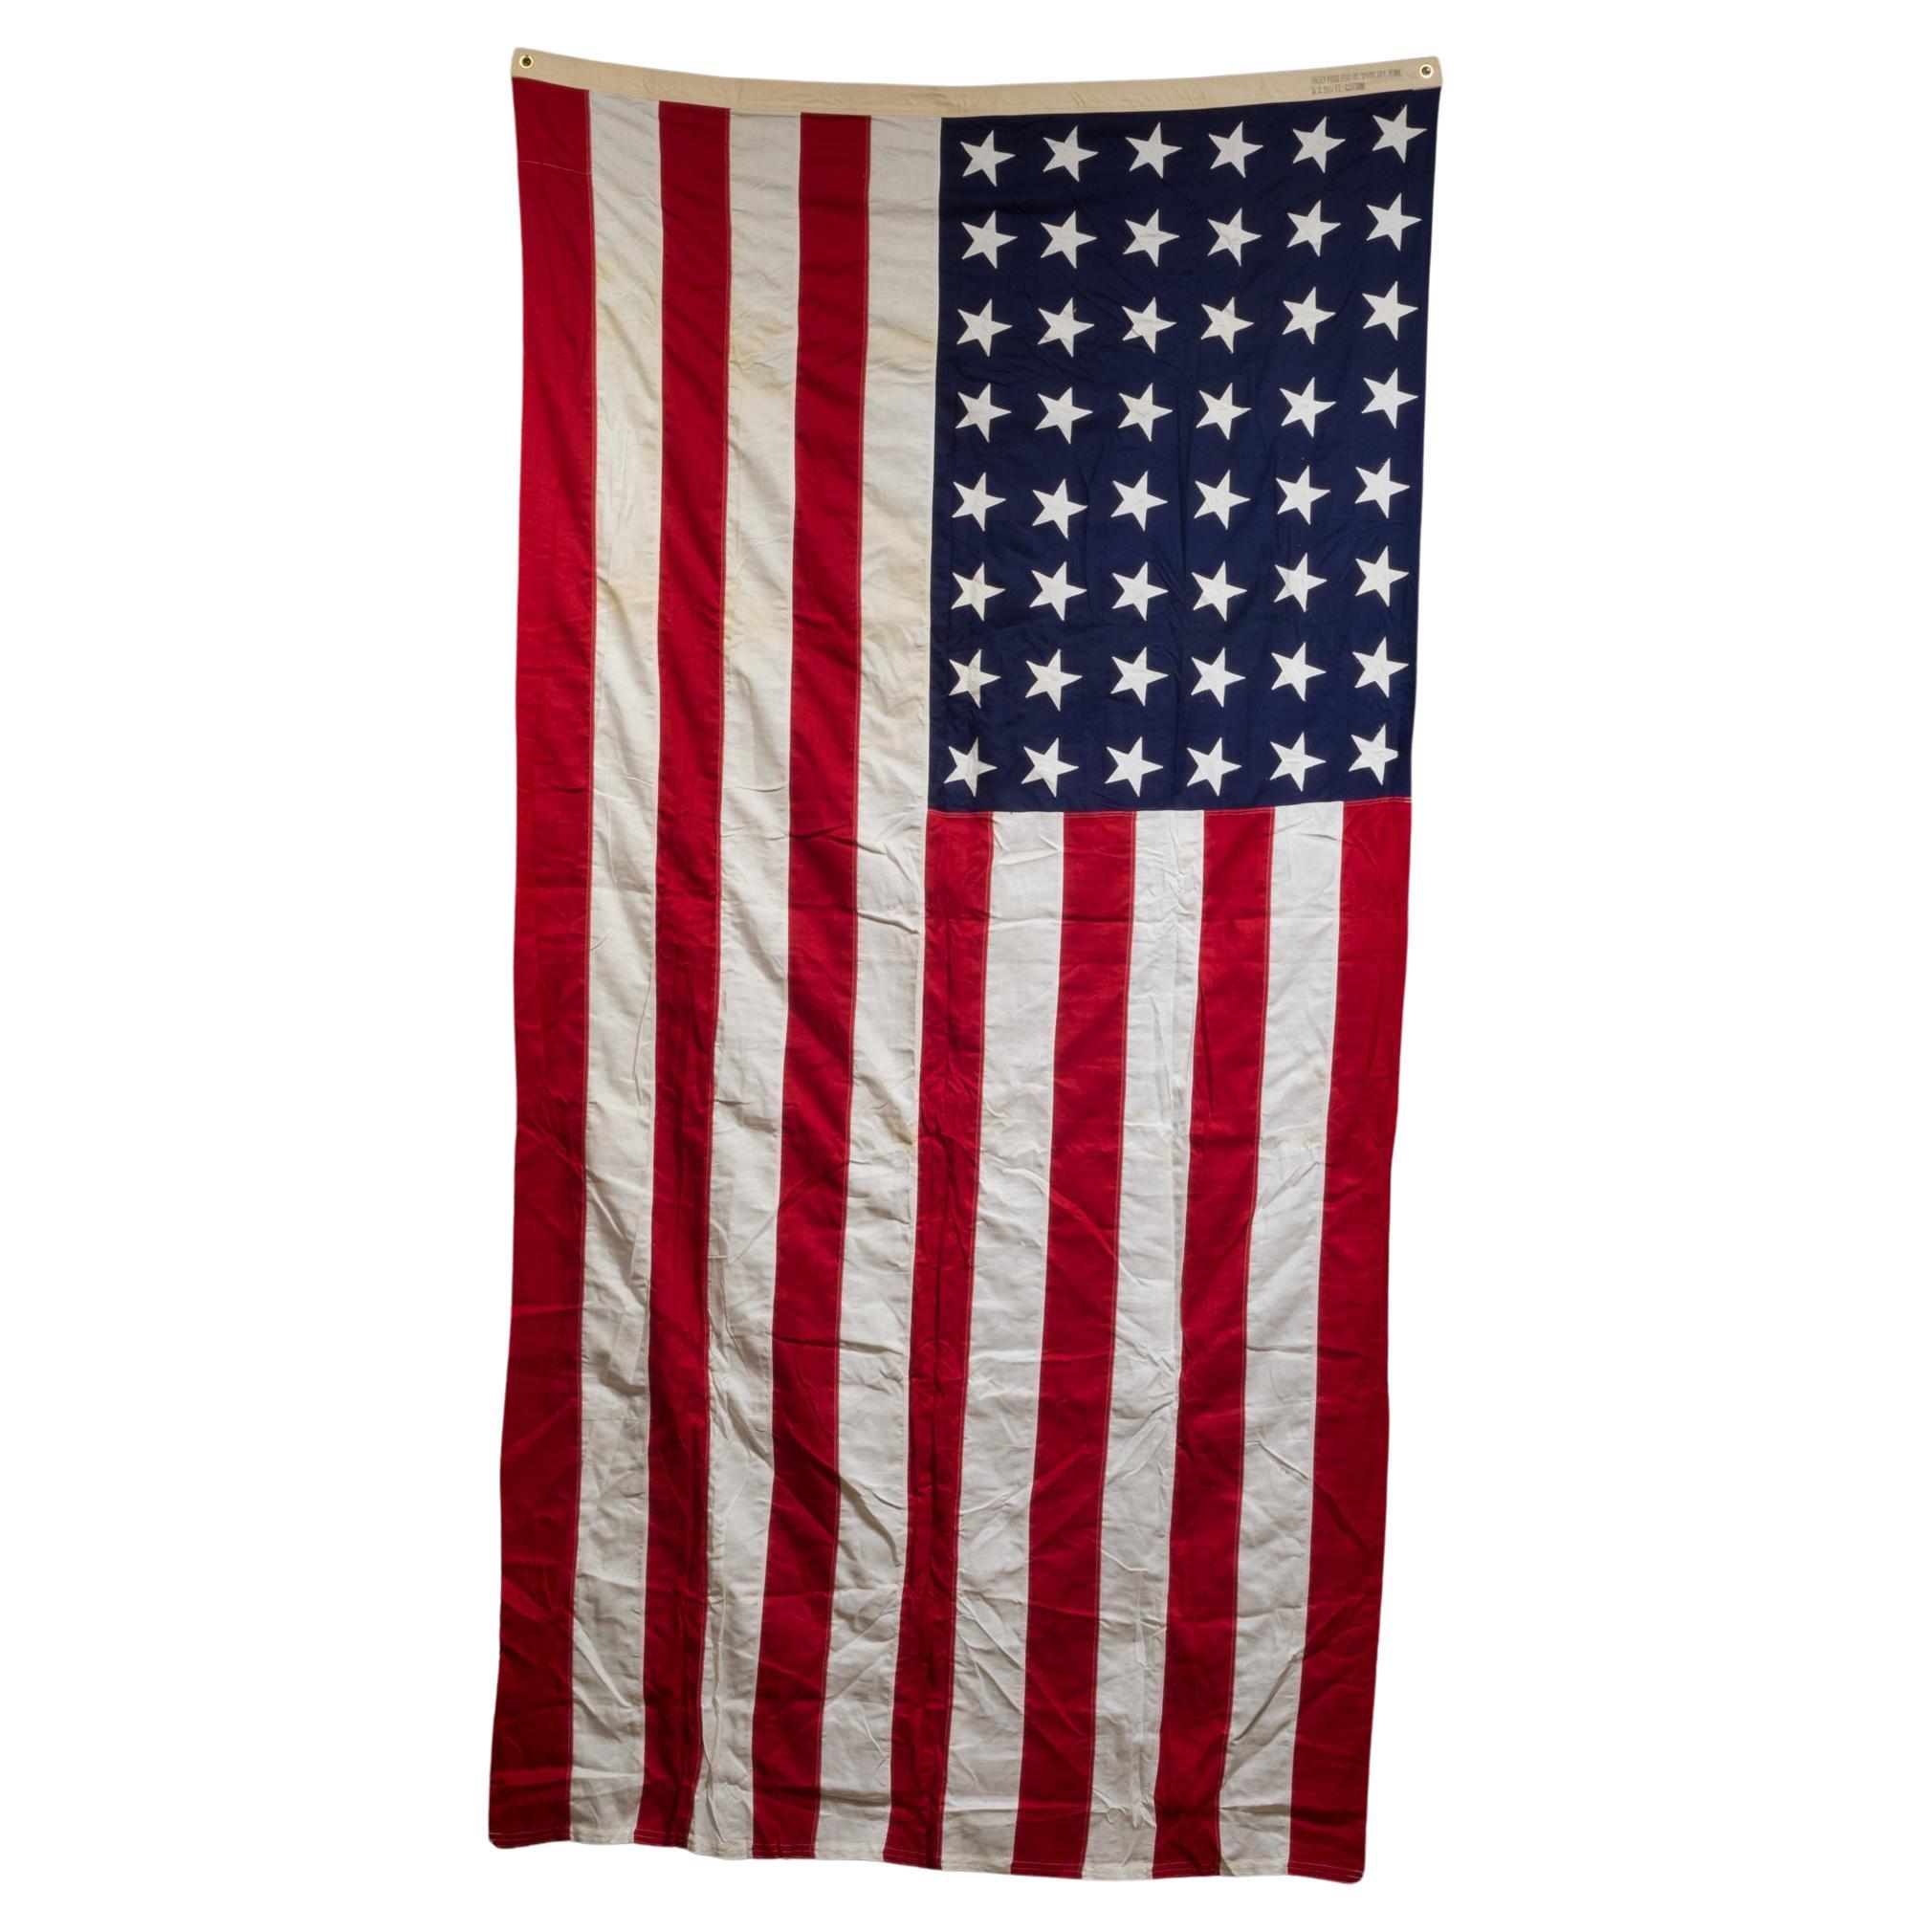 Monumental "Valley Forge" American Flag with 48 Stars, c.1940-1950  (FREE SHIP)